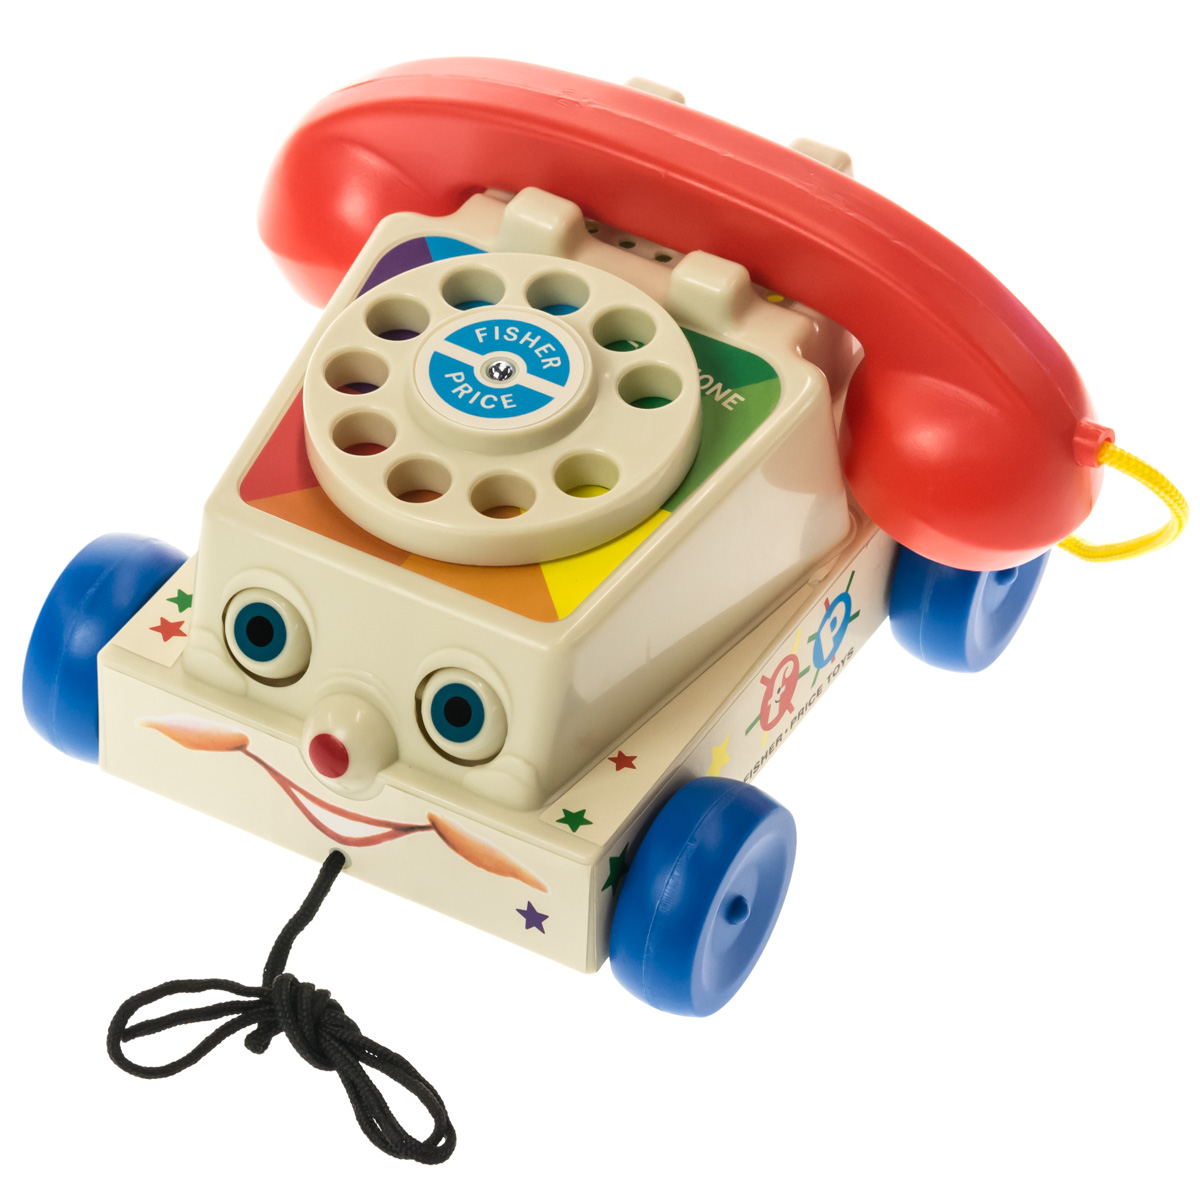 Fisher-Price Classic Chatter Telephone